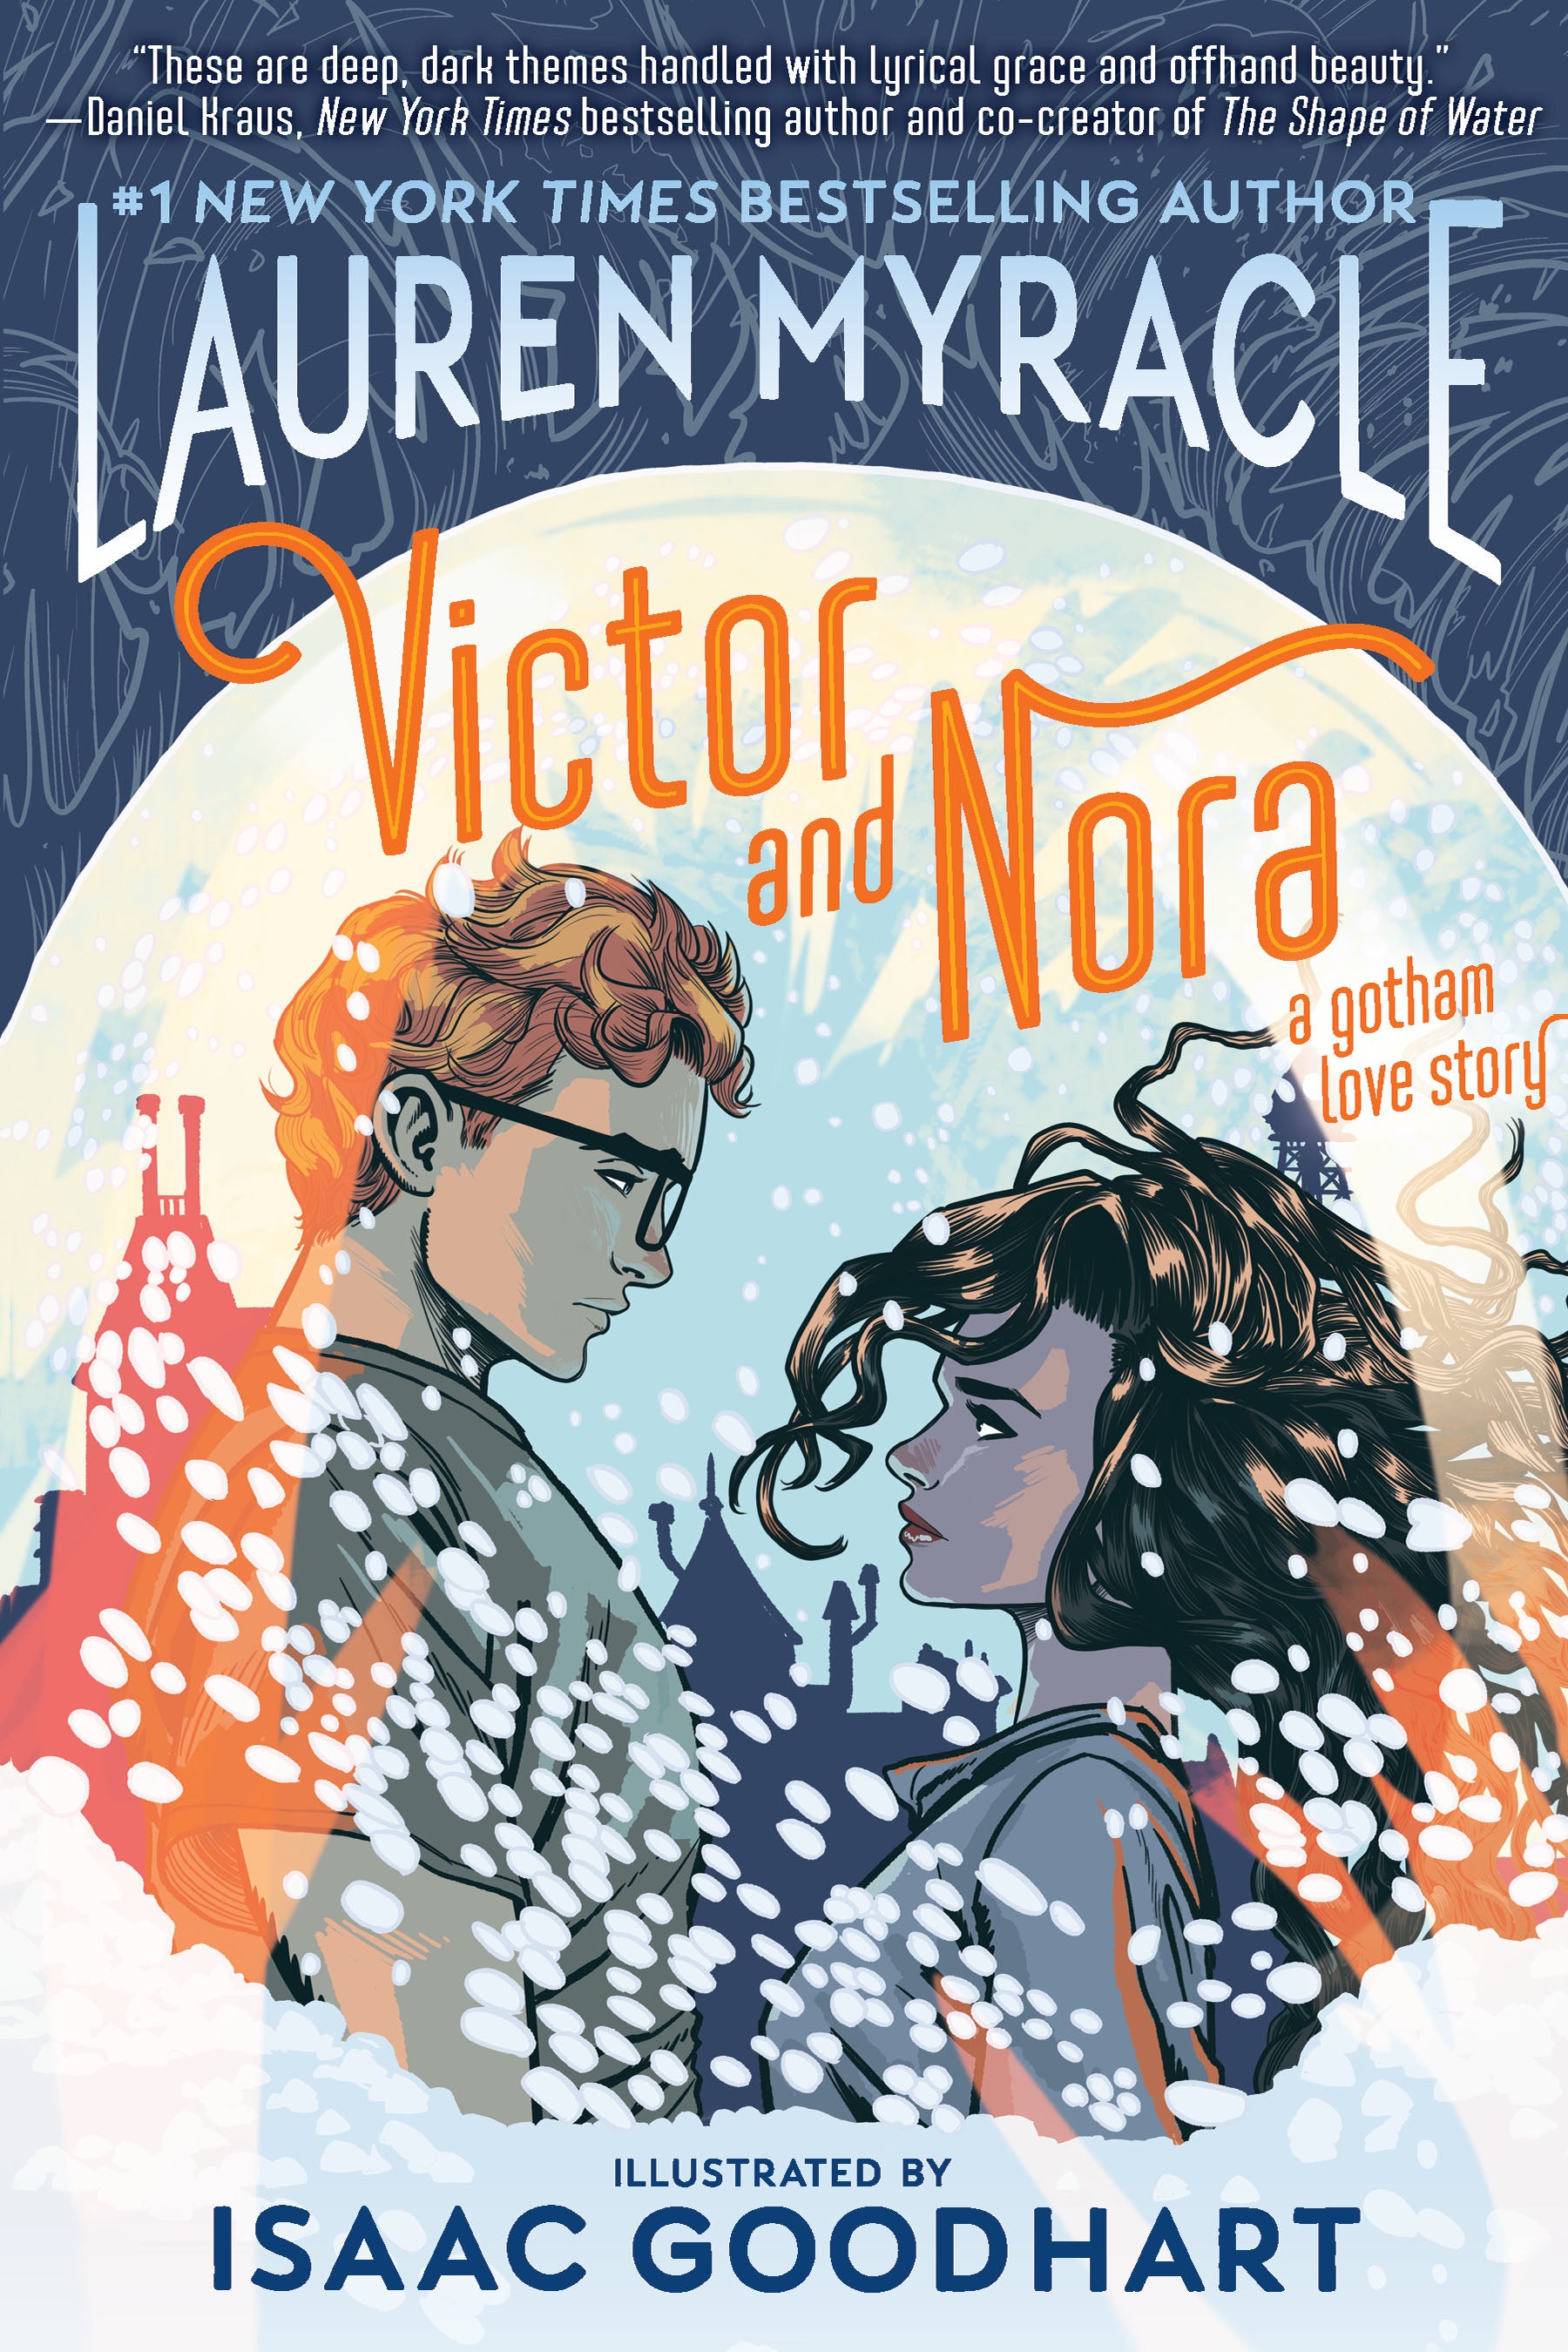 VICTOR AND NORA A GOTHAM LOVE STORY TRADE PAPERBACK